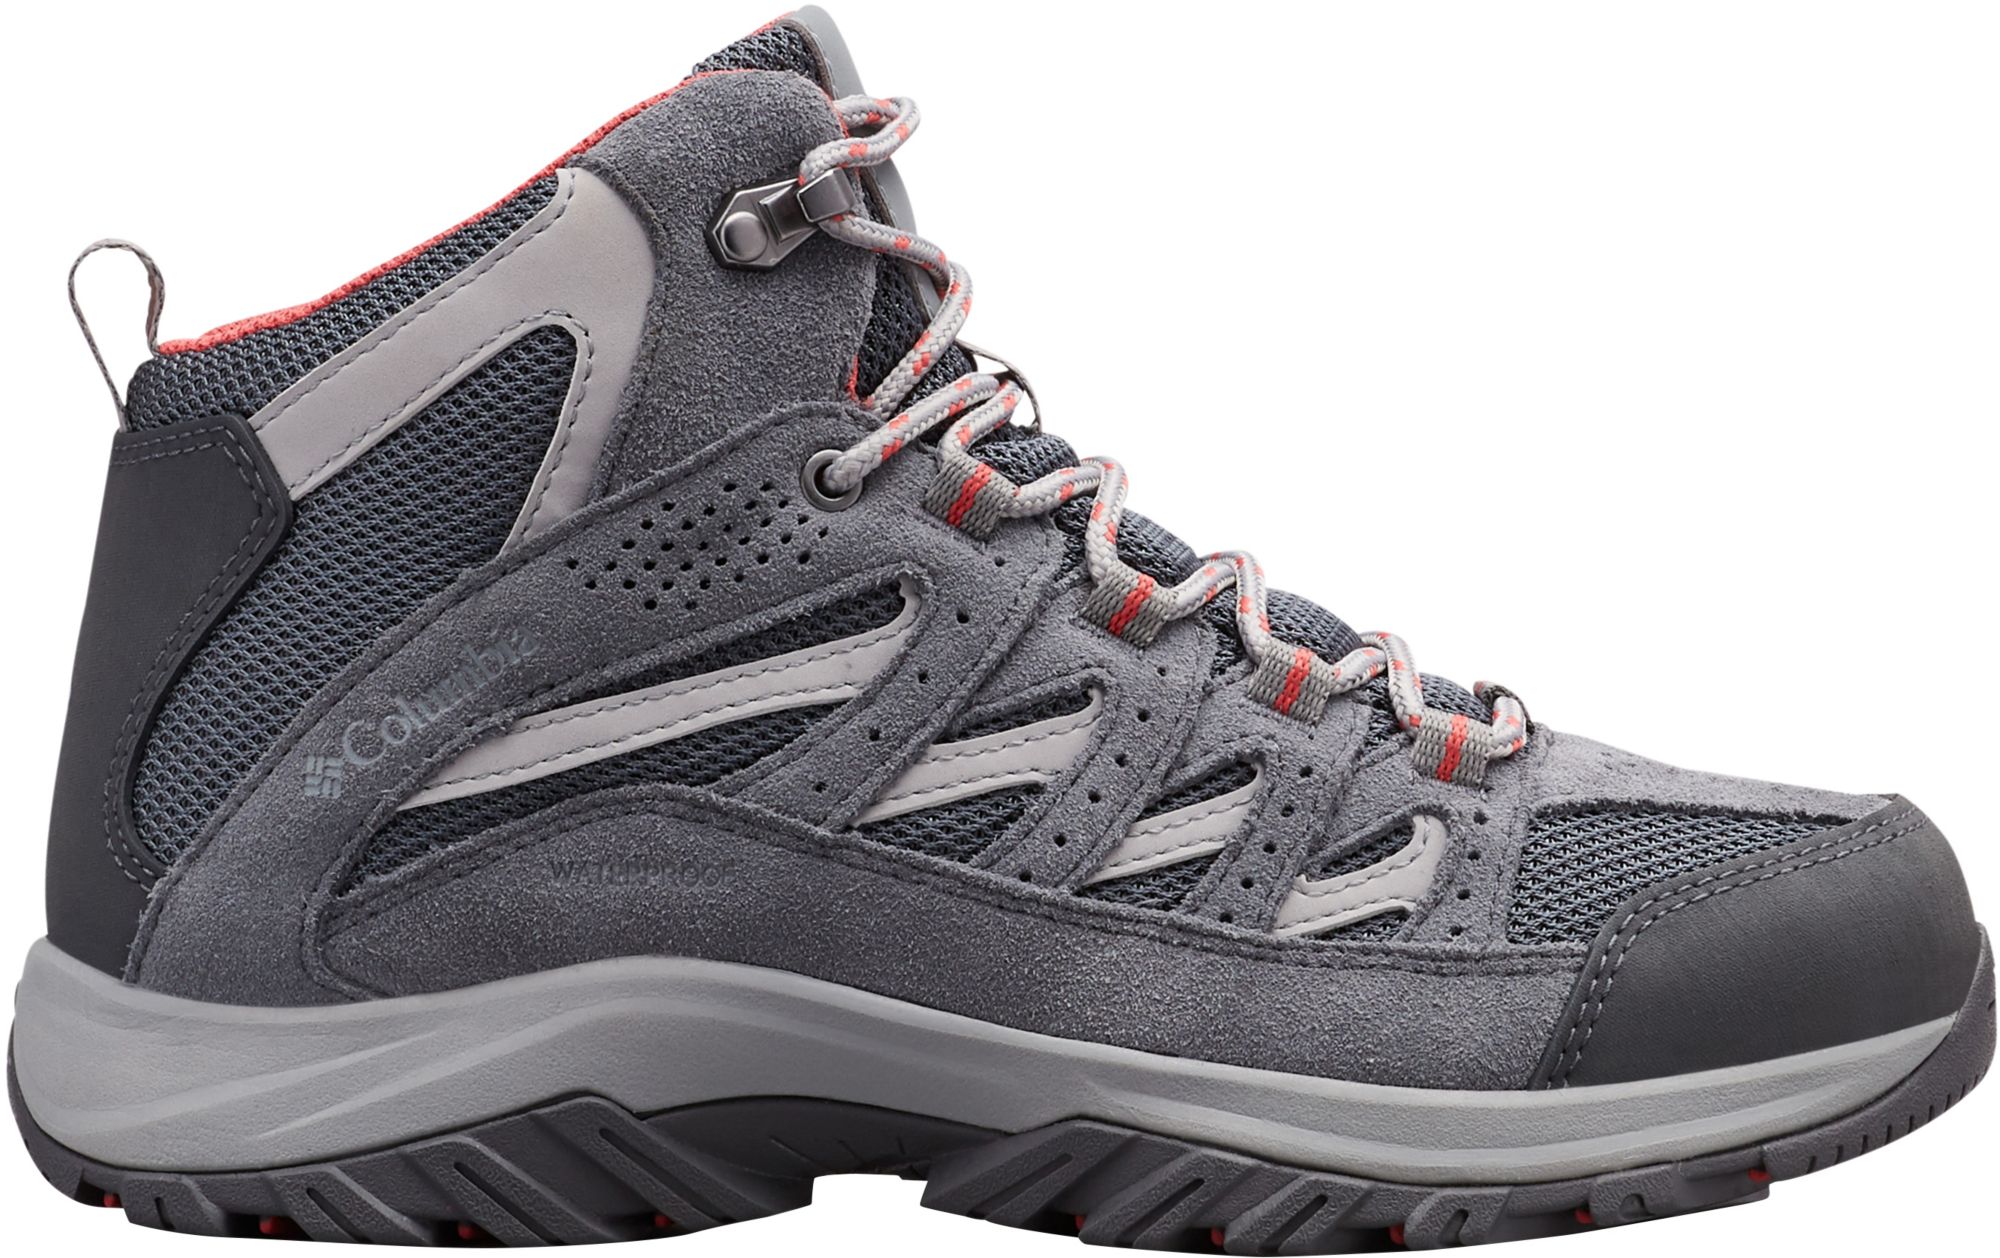 Photos - Trekking Shoes Columbia Women's Crestwood Mid Waterproof Hiking Boots, Size 8, Graphite 1 